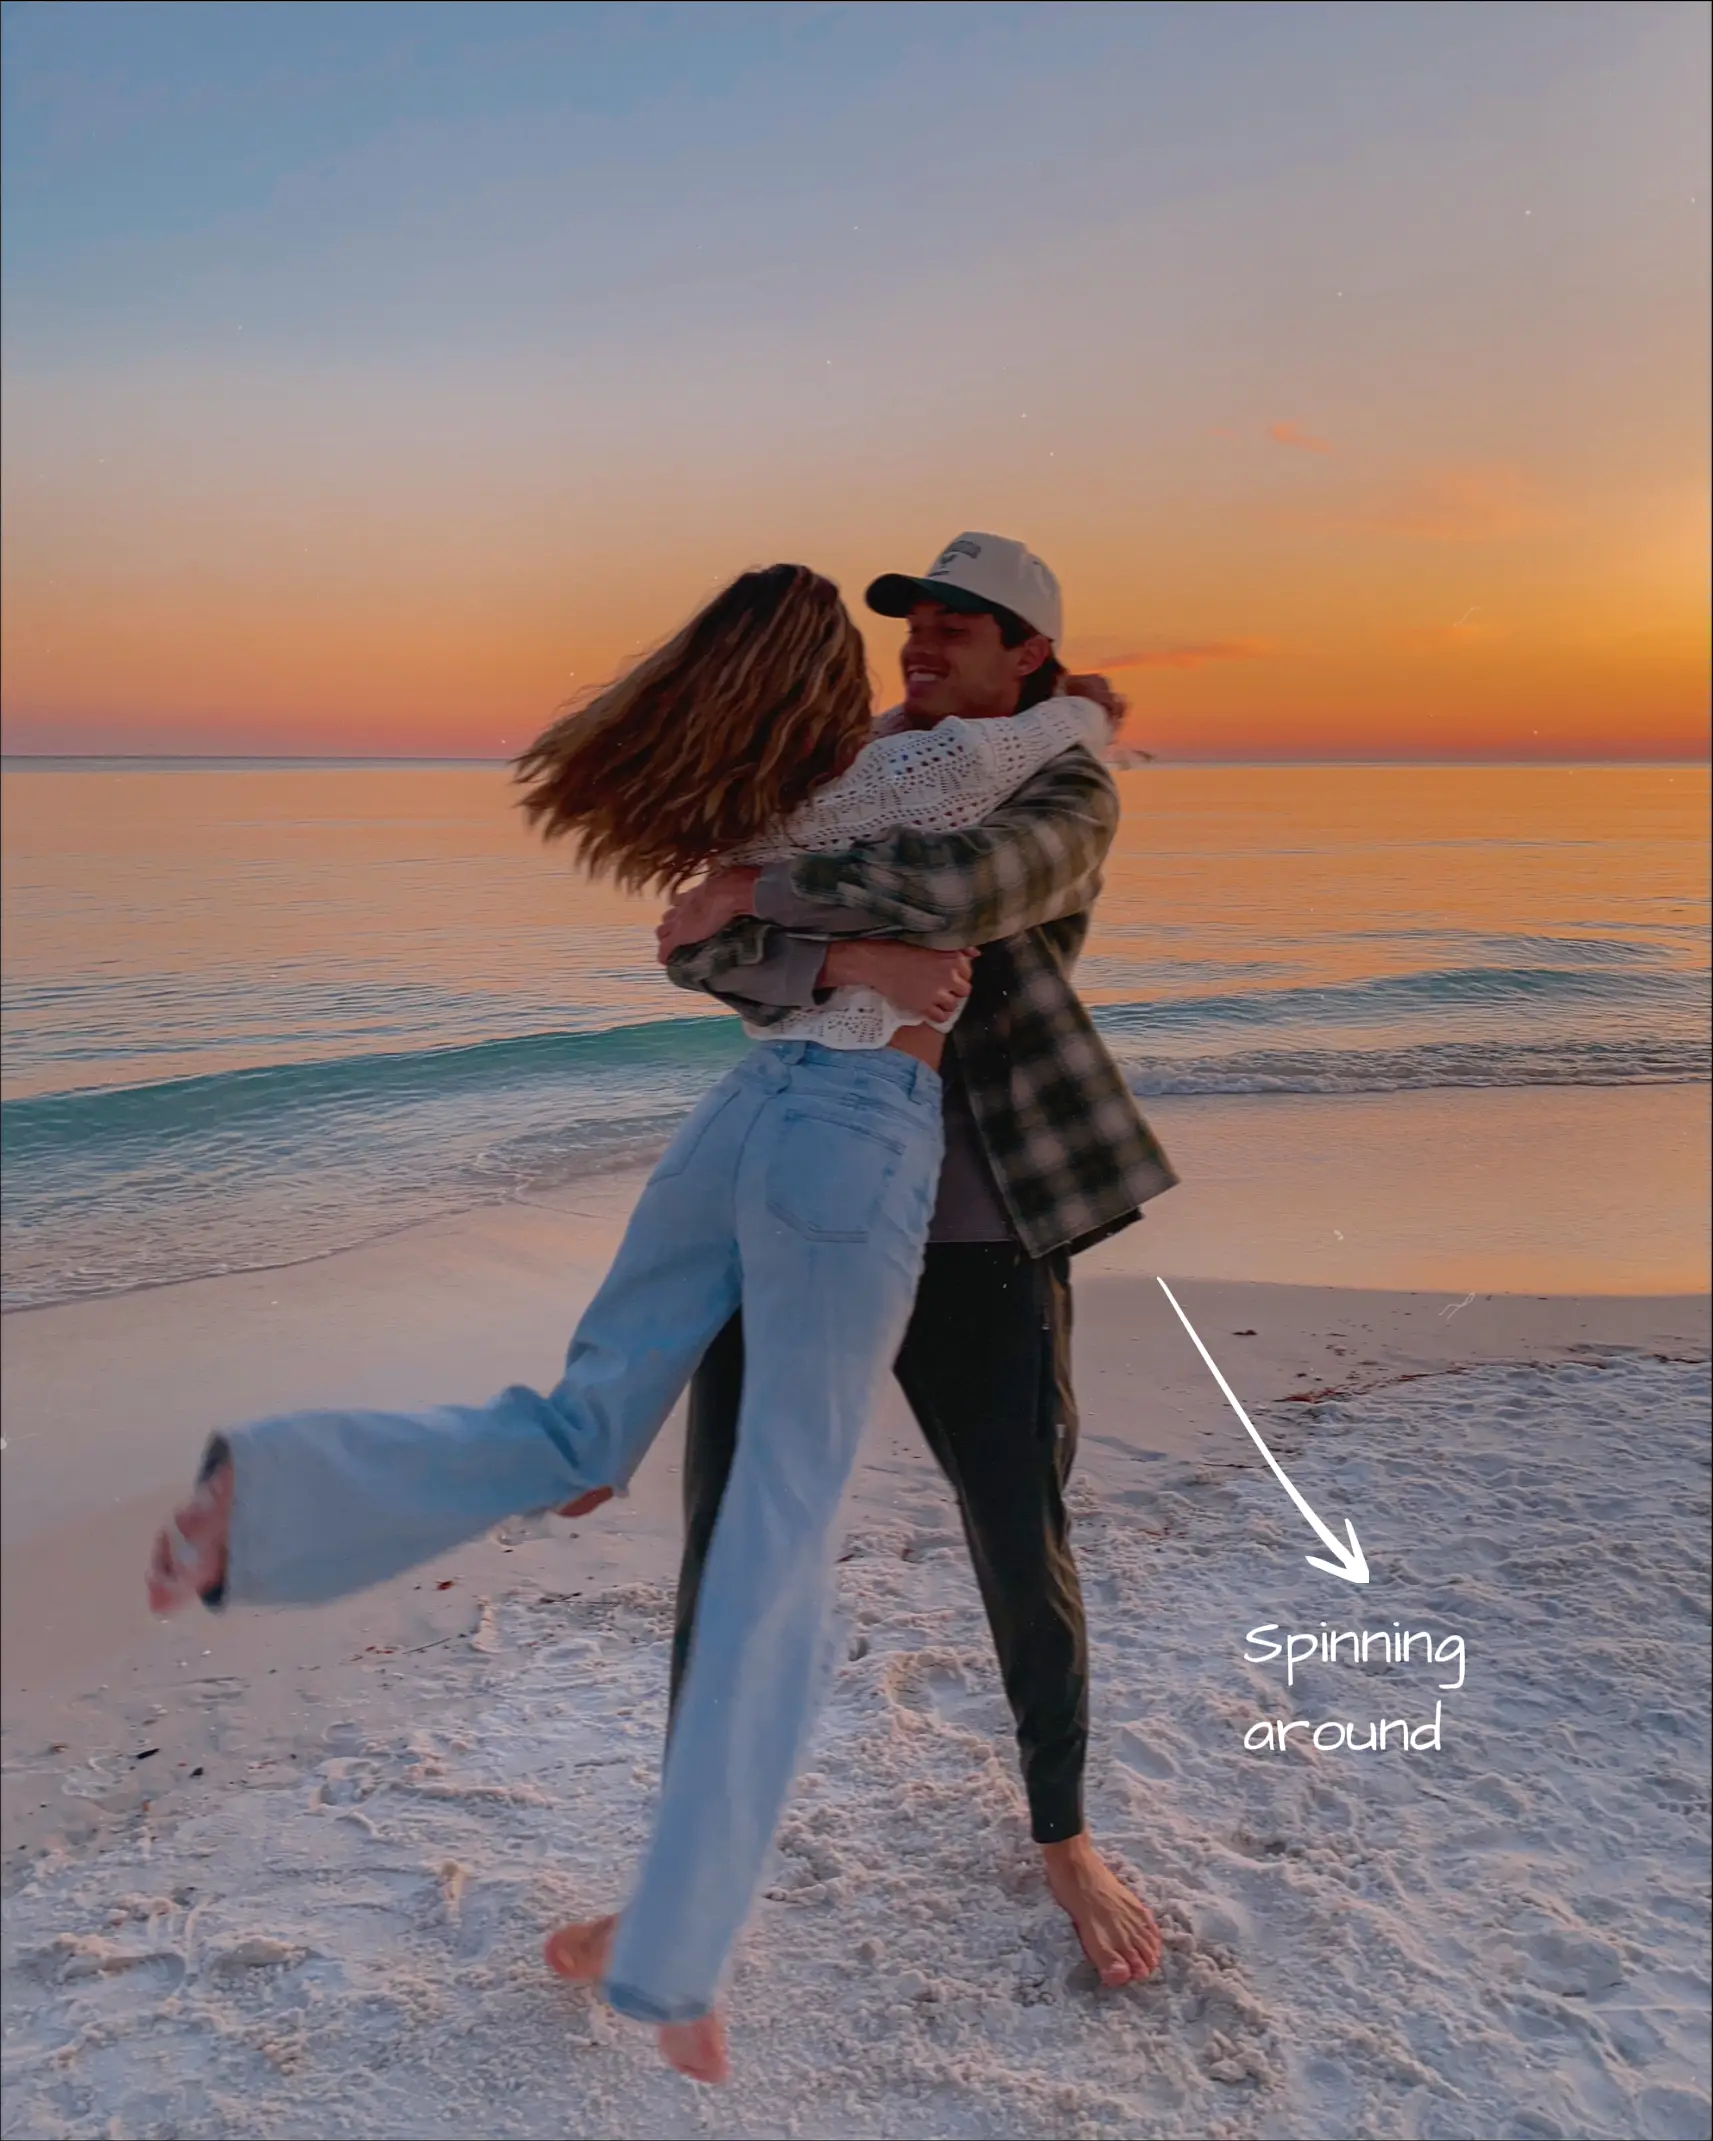  A man and a woman are hugging each other on a beach. The man is wearing a hat and jeans, while the woman is wearing a white shirt and jeans. The couple is spinning around each other, and they are both